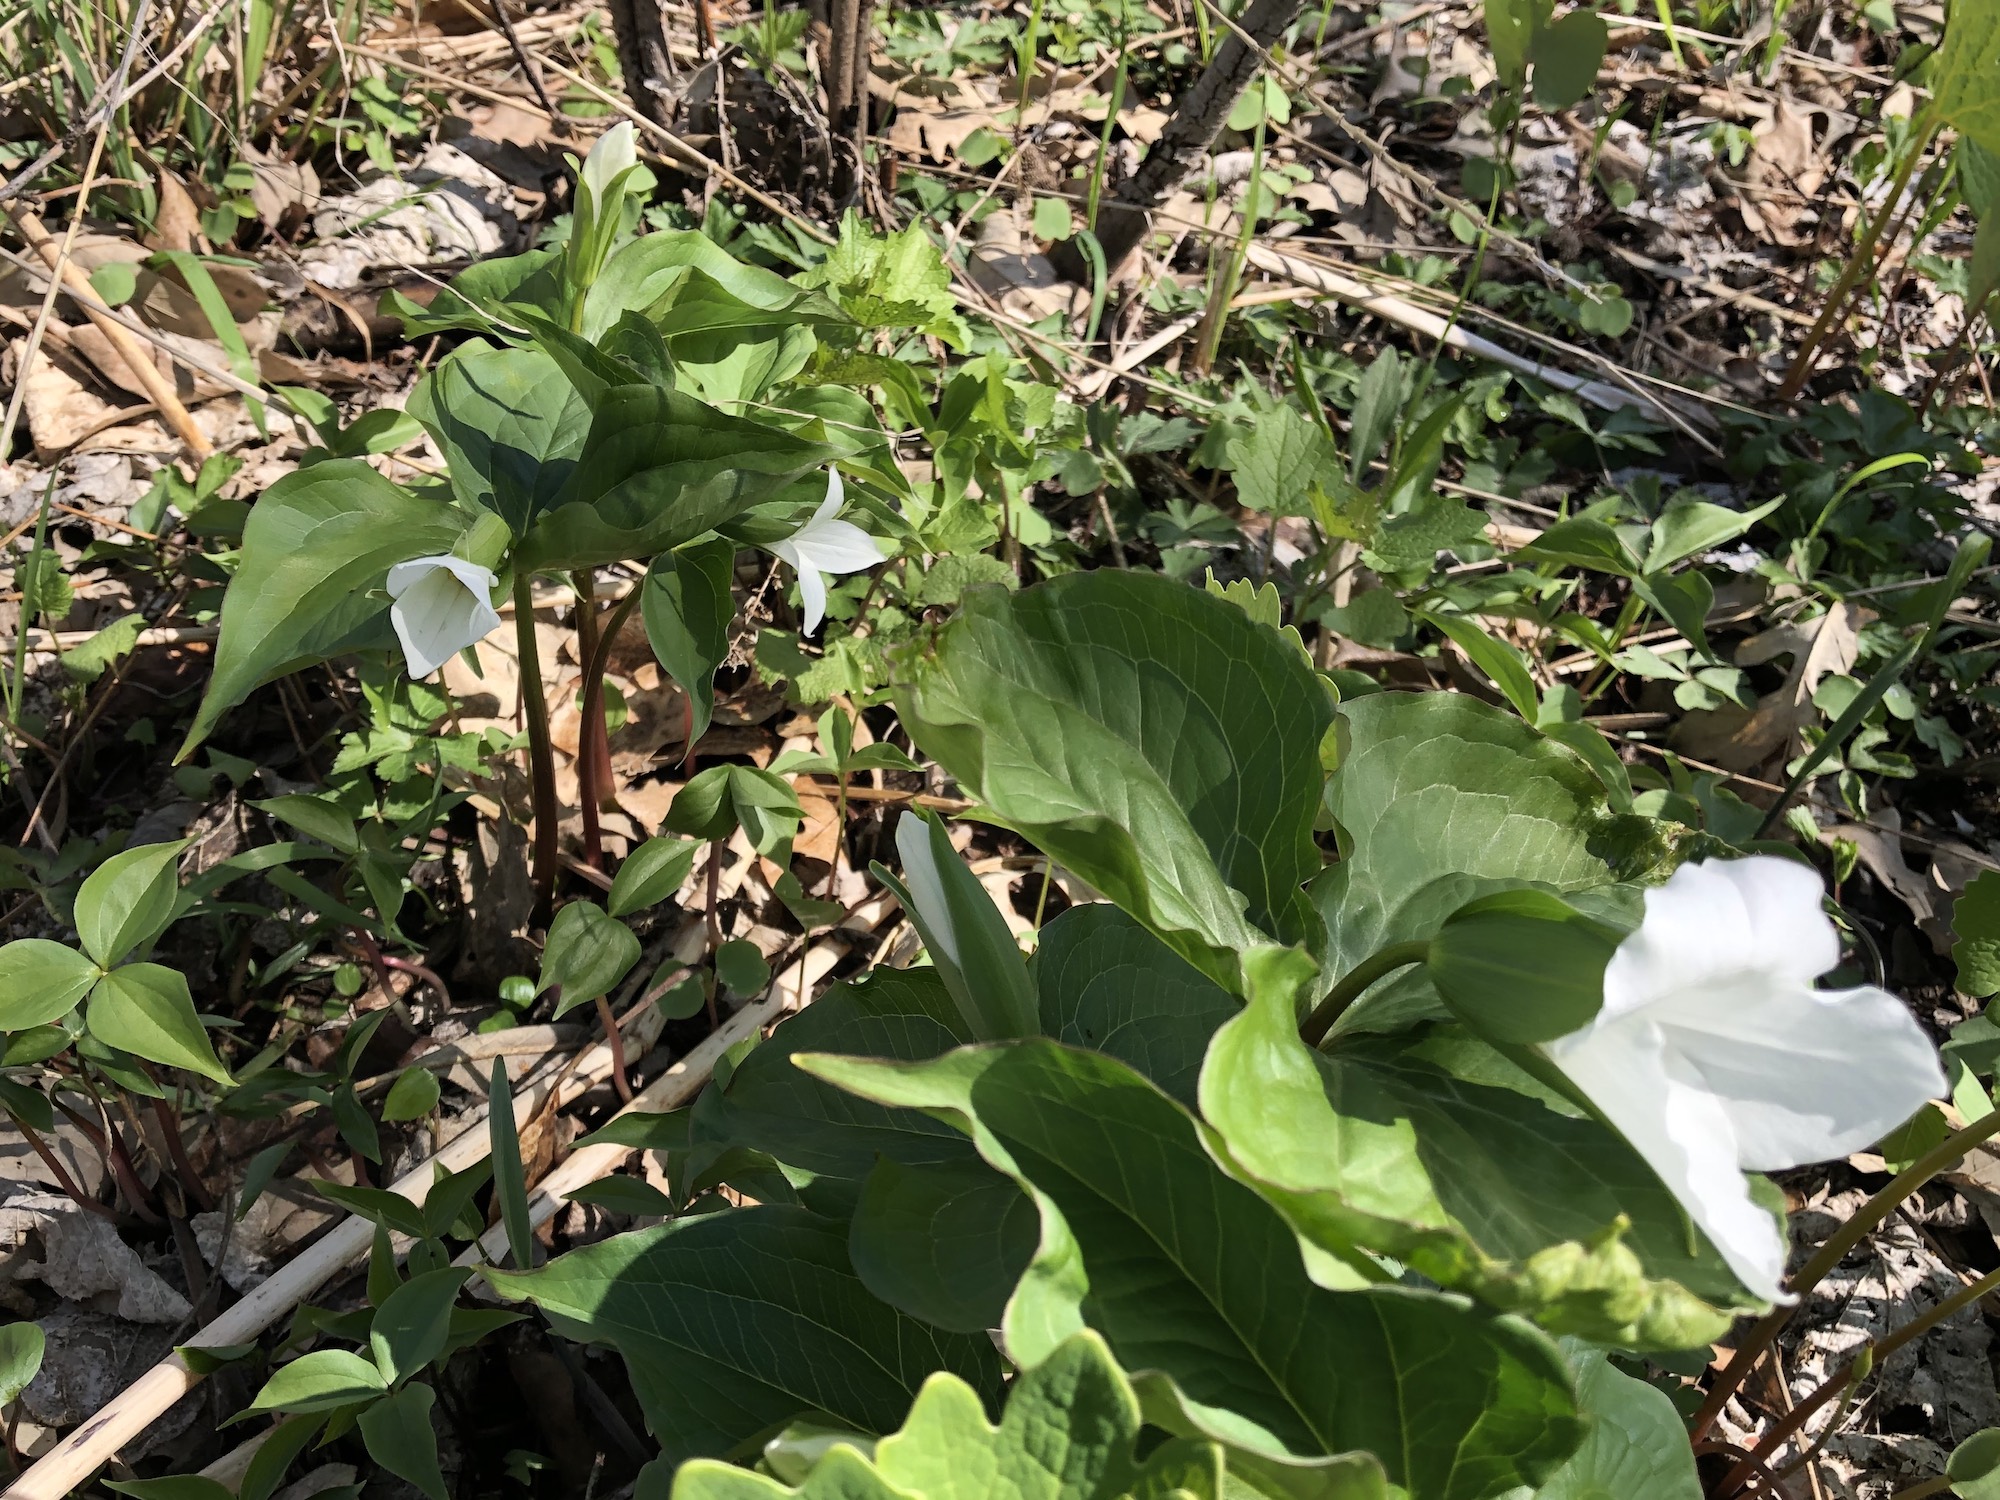 Great White Trillium on hill near Council Ring on April26, 2019.